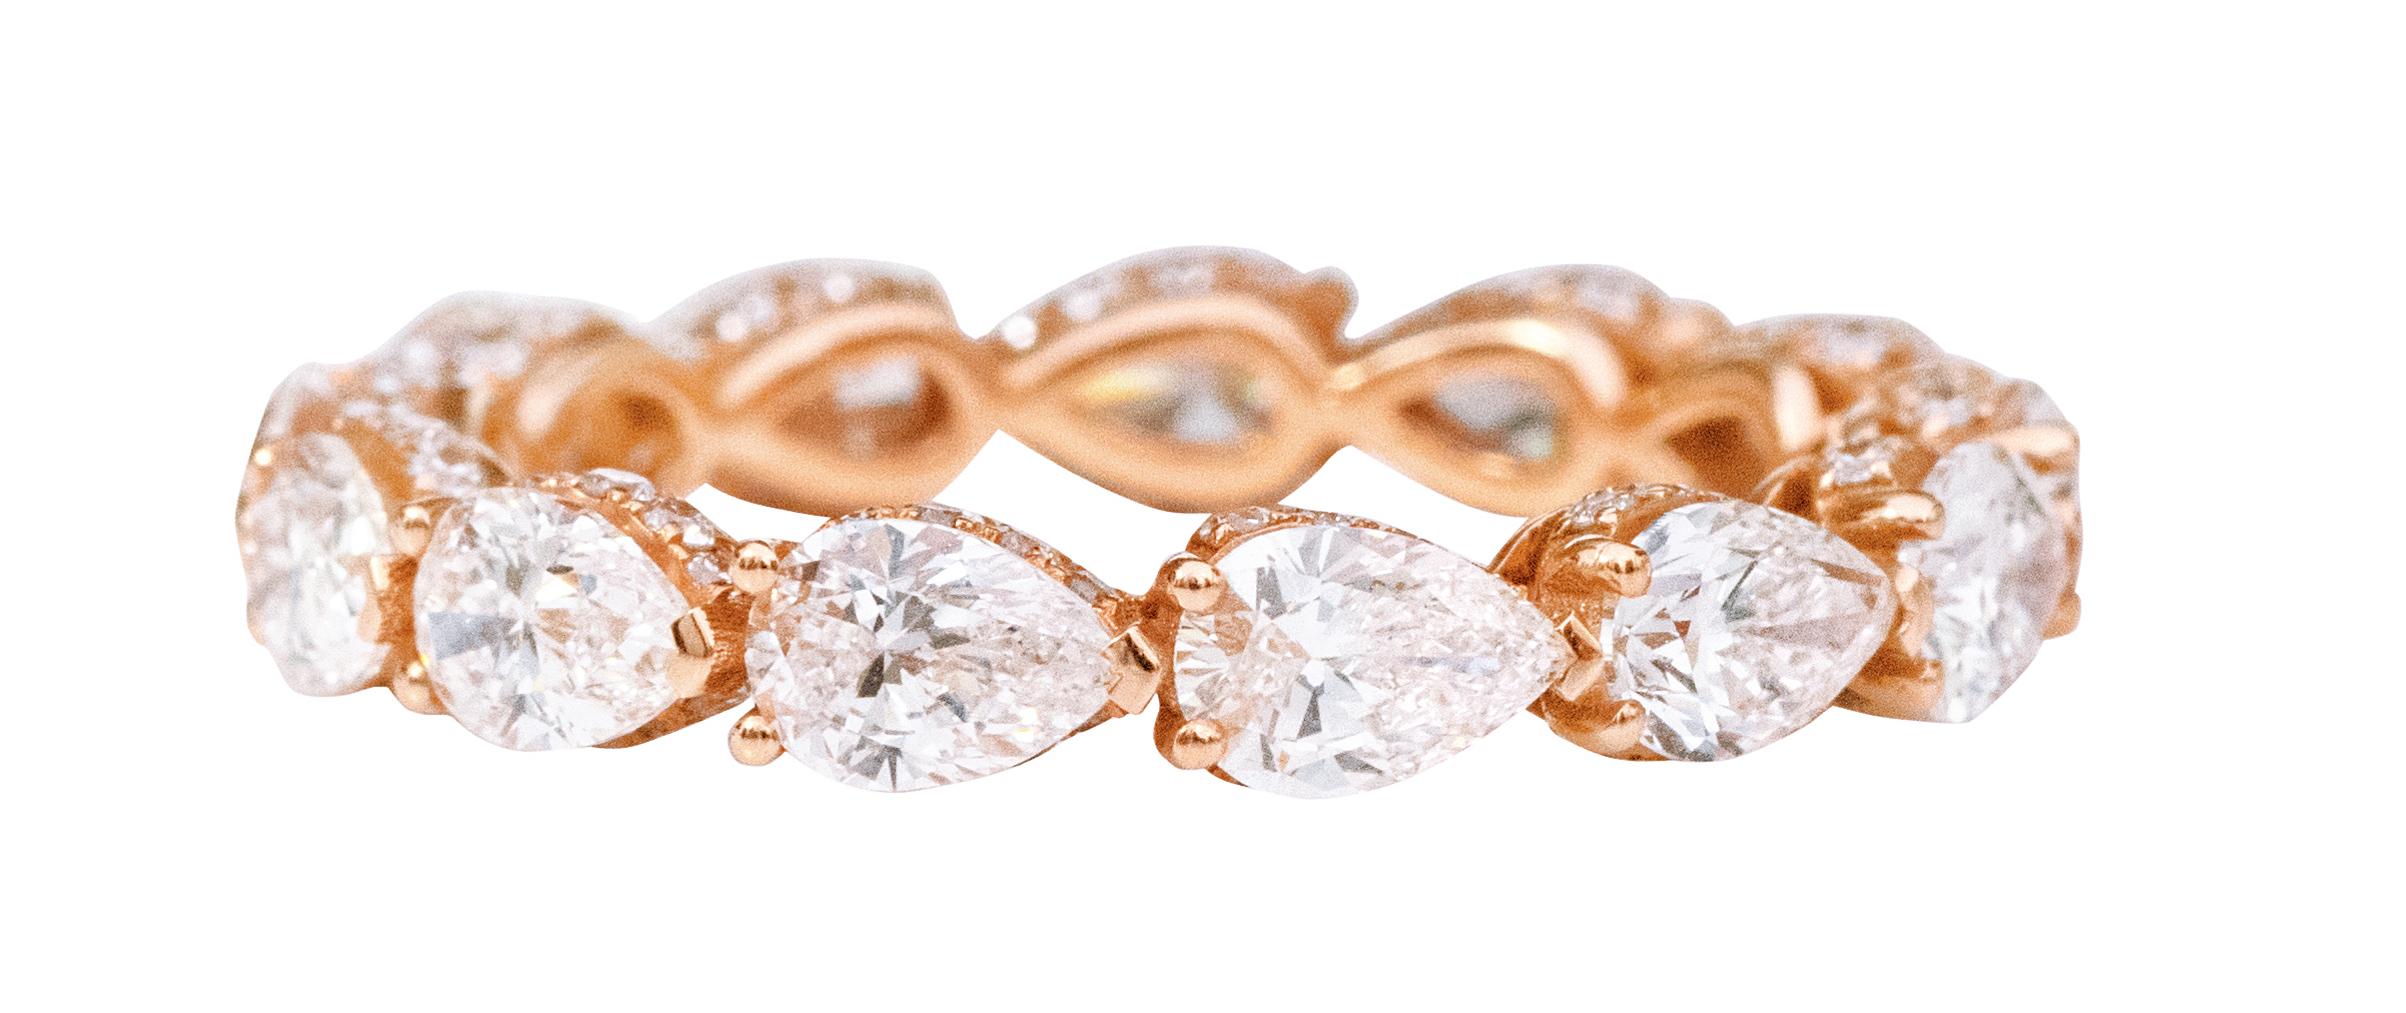 18 Karat Rose Gold 3.63 Carat Solitaire Pear-Shape Diamond Eternity Band Ring

The sparkle of a diamond, the essence of its rarity, all wrapped around your fingers. This unique pear shaped diamond band is all you need to flaunt your style quotient.